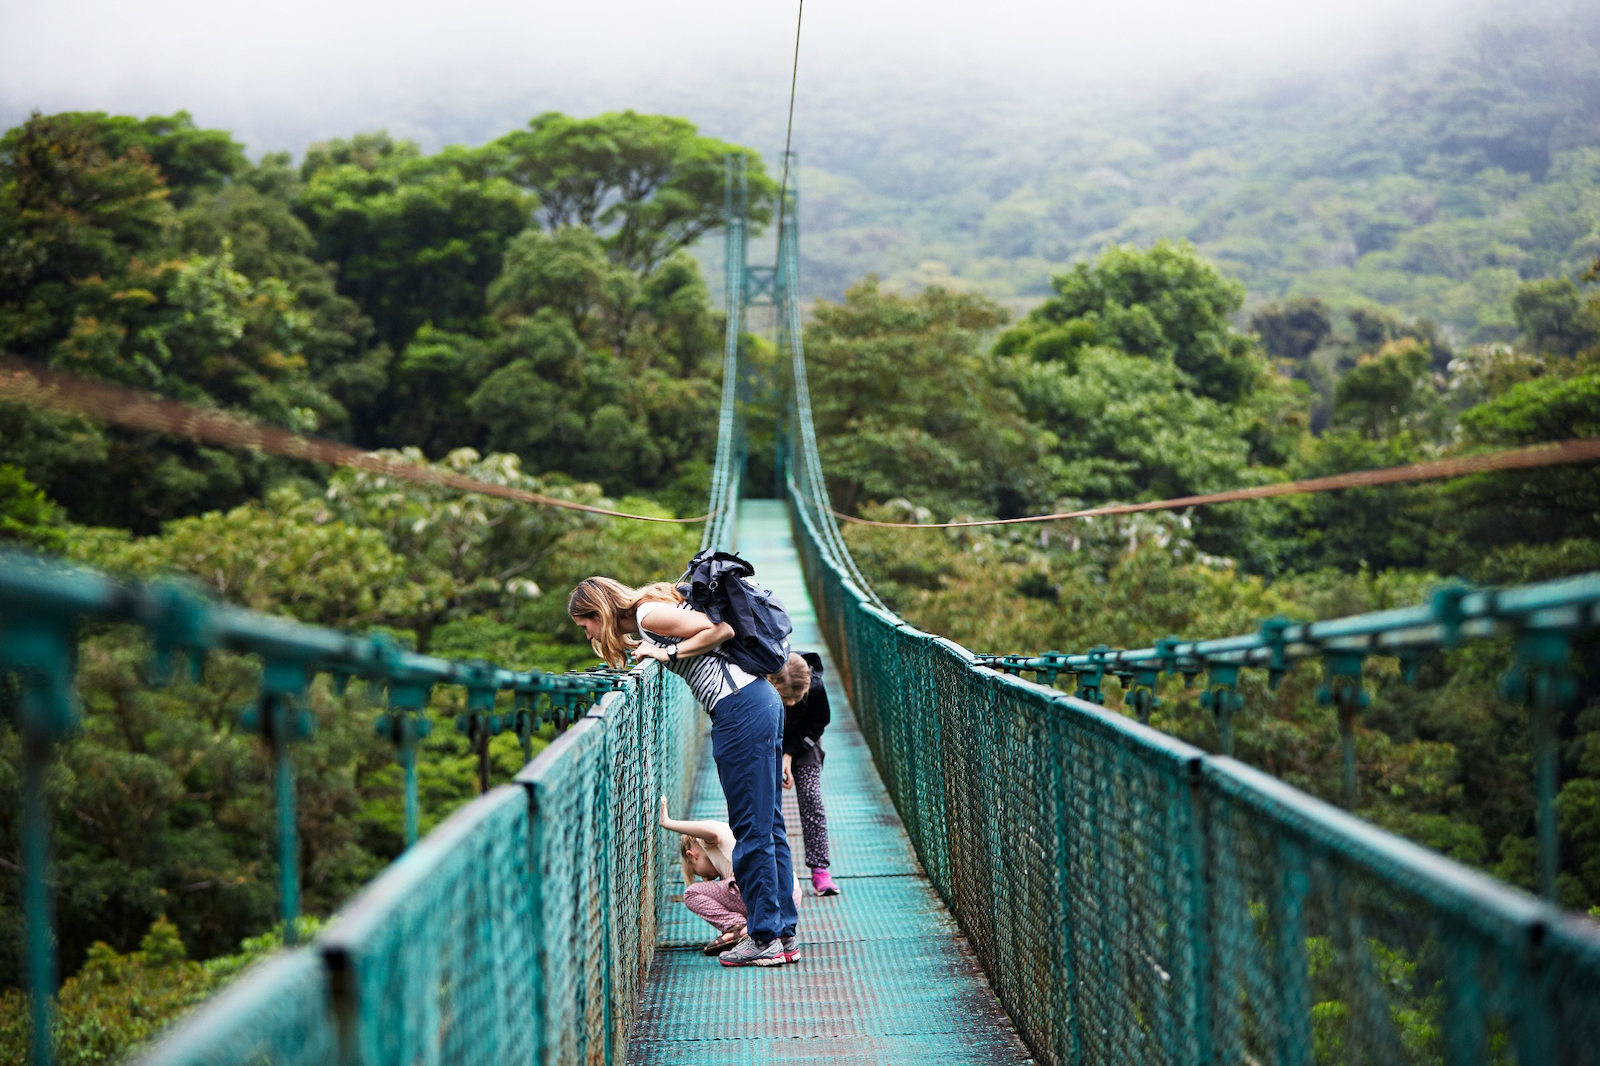 A woman and her daughters on a bridge in the rain forest